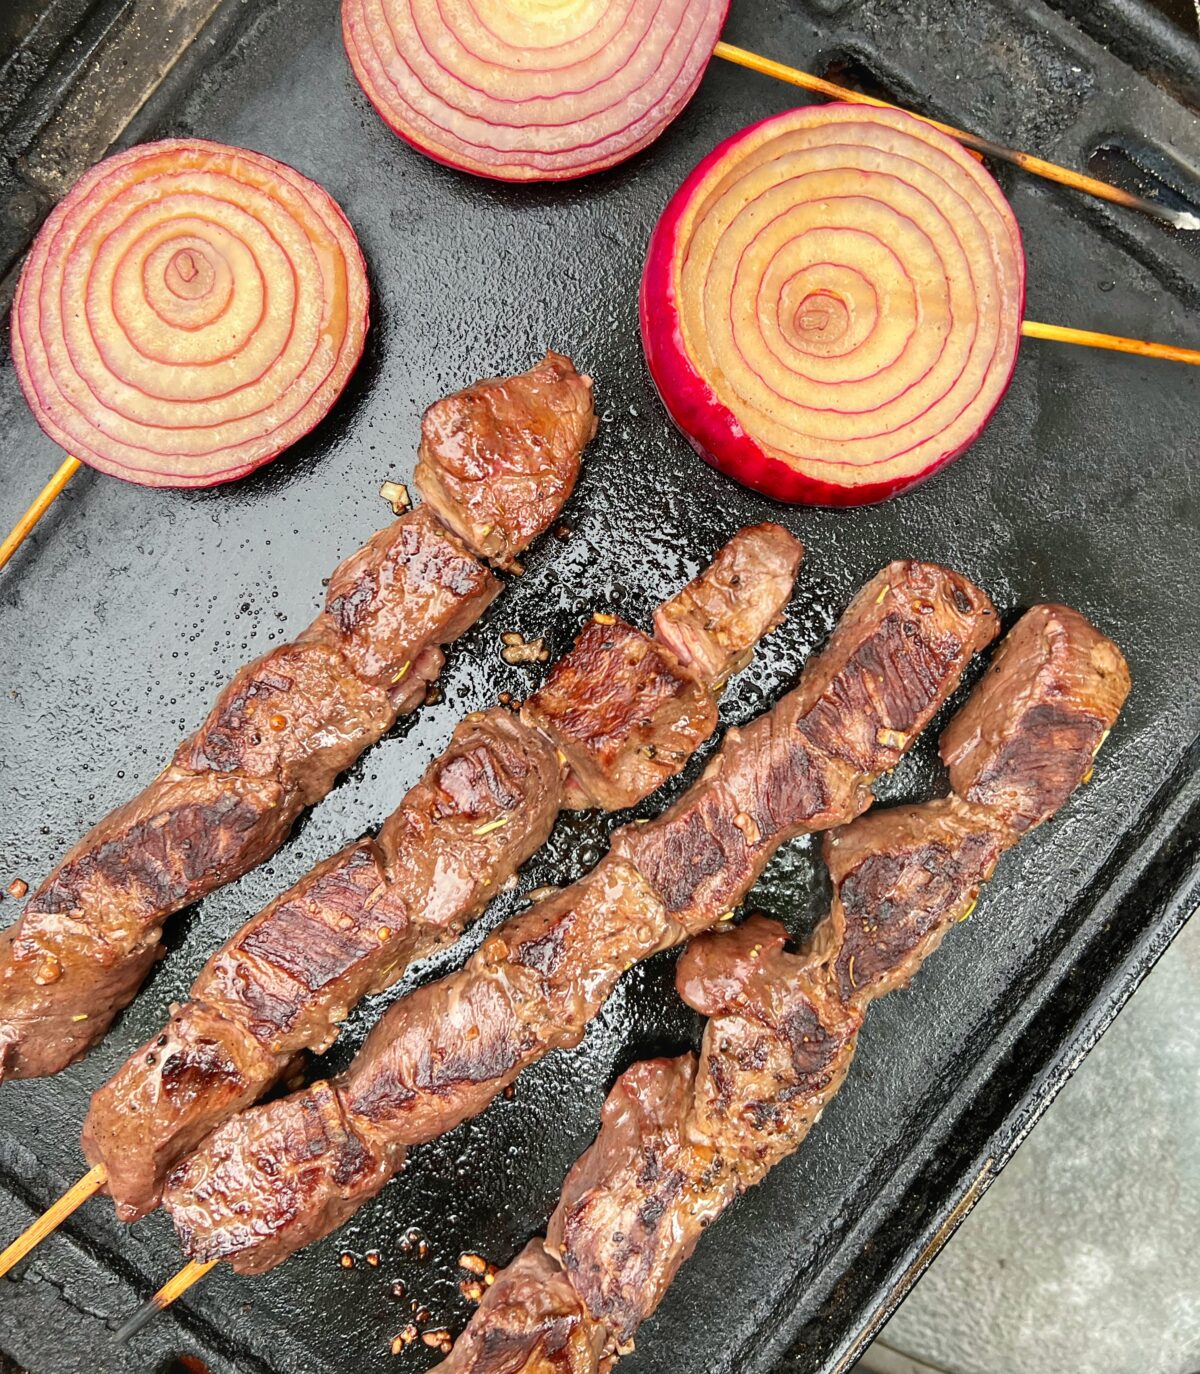 Skewers and onions on the grill